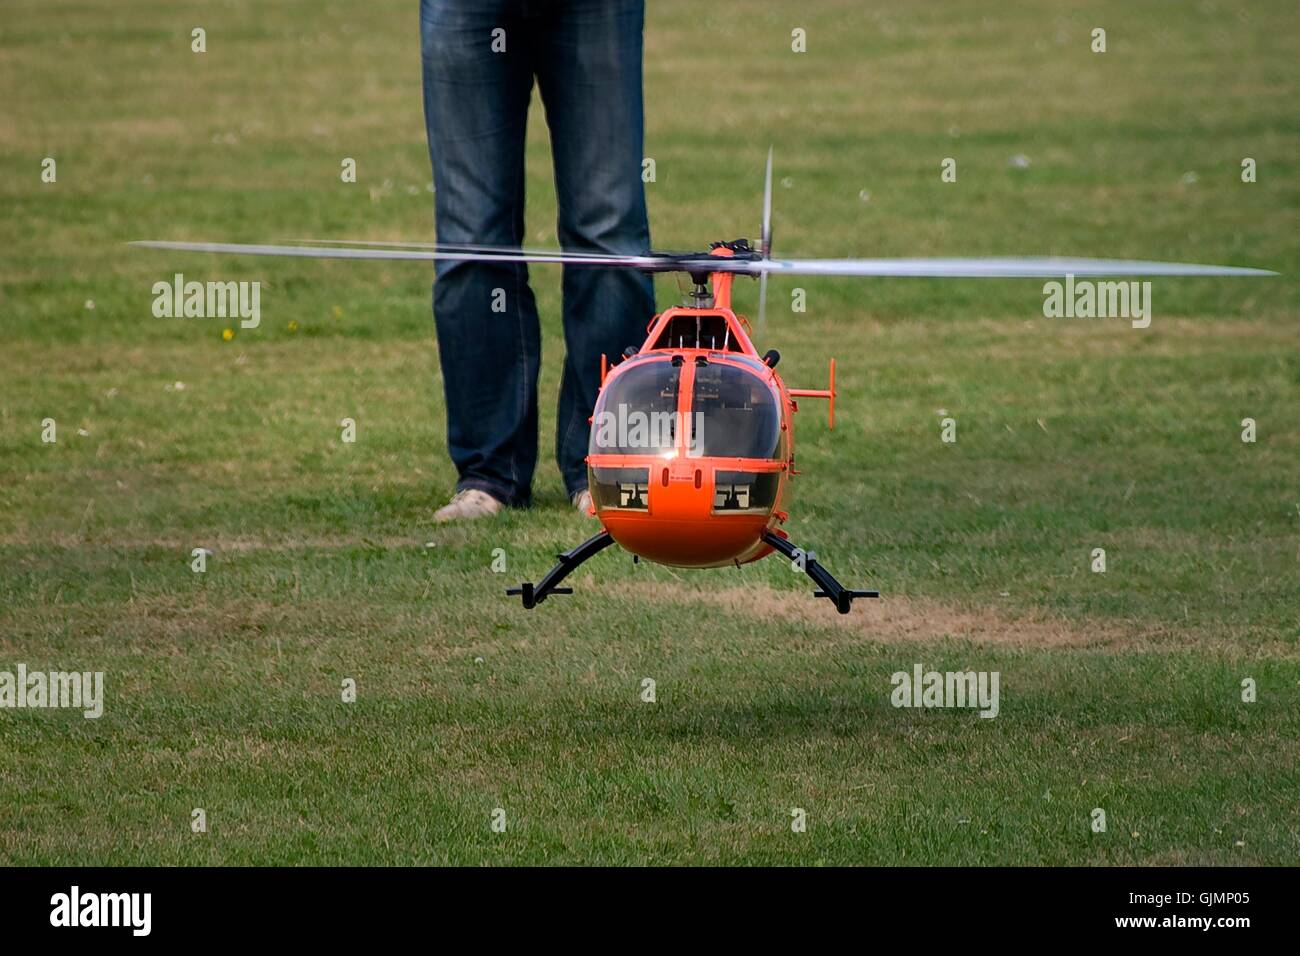 remote-controlled construction of models helicopter Stock Photo